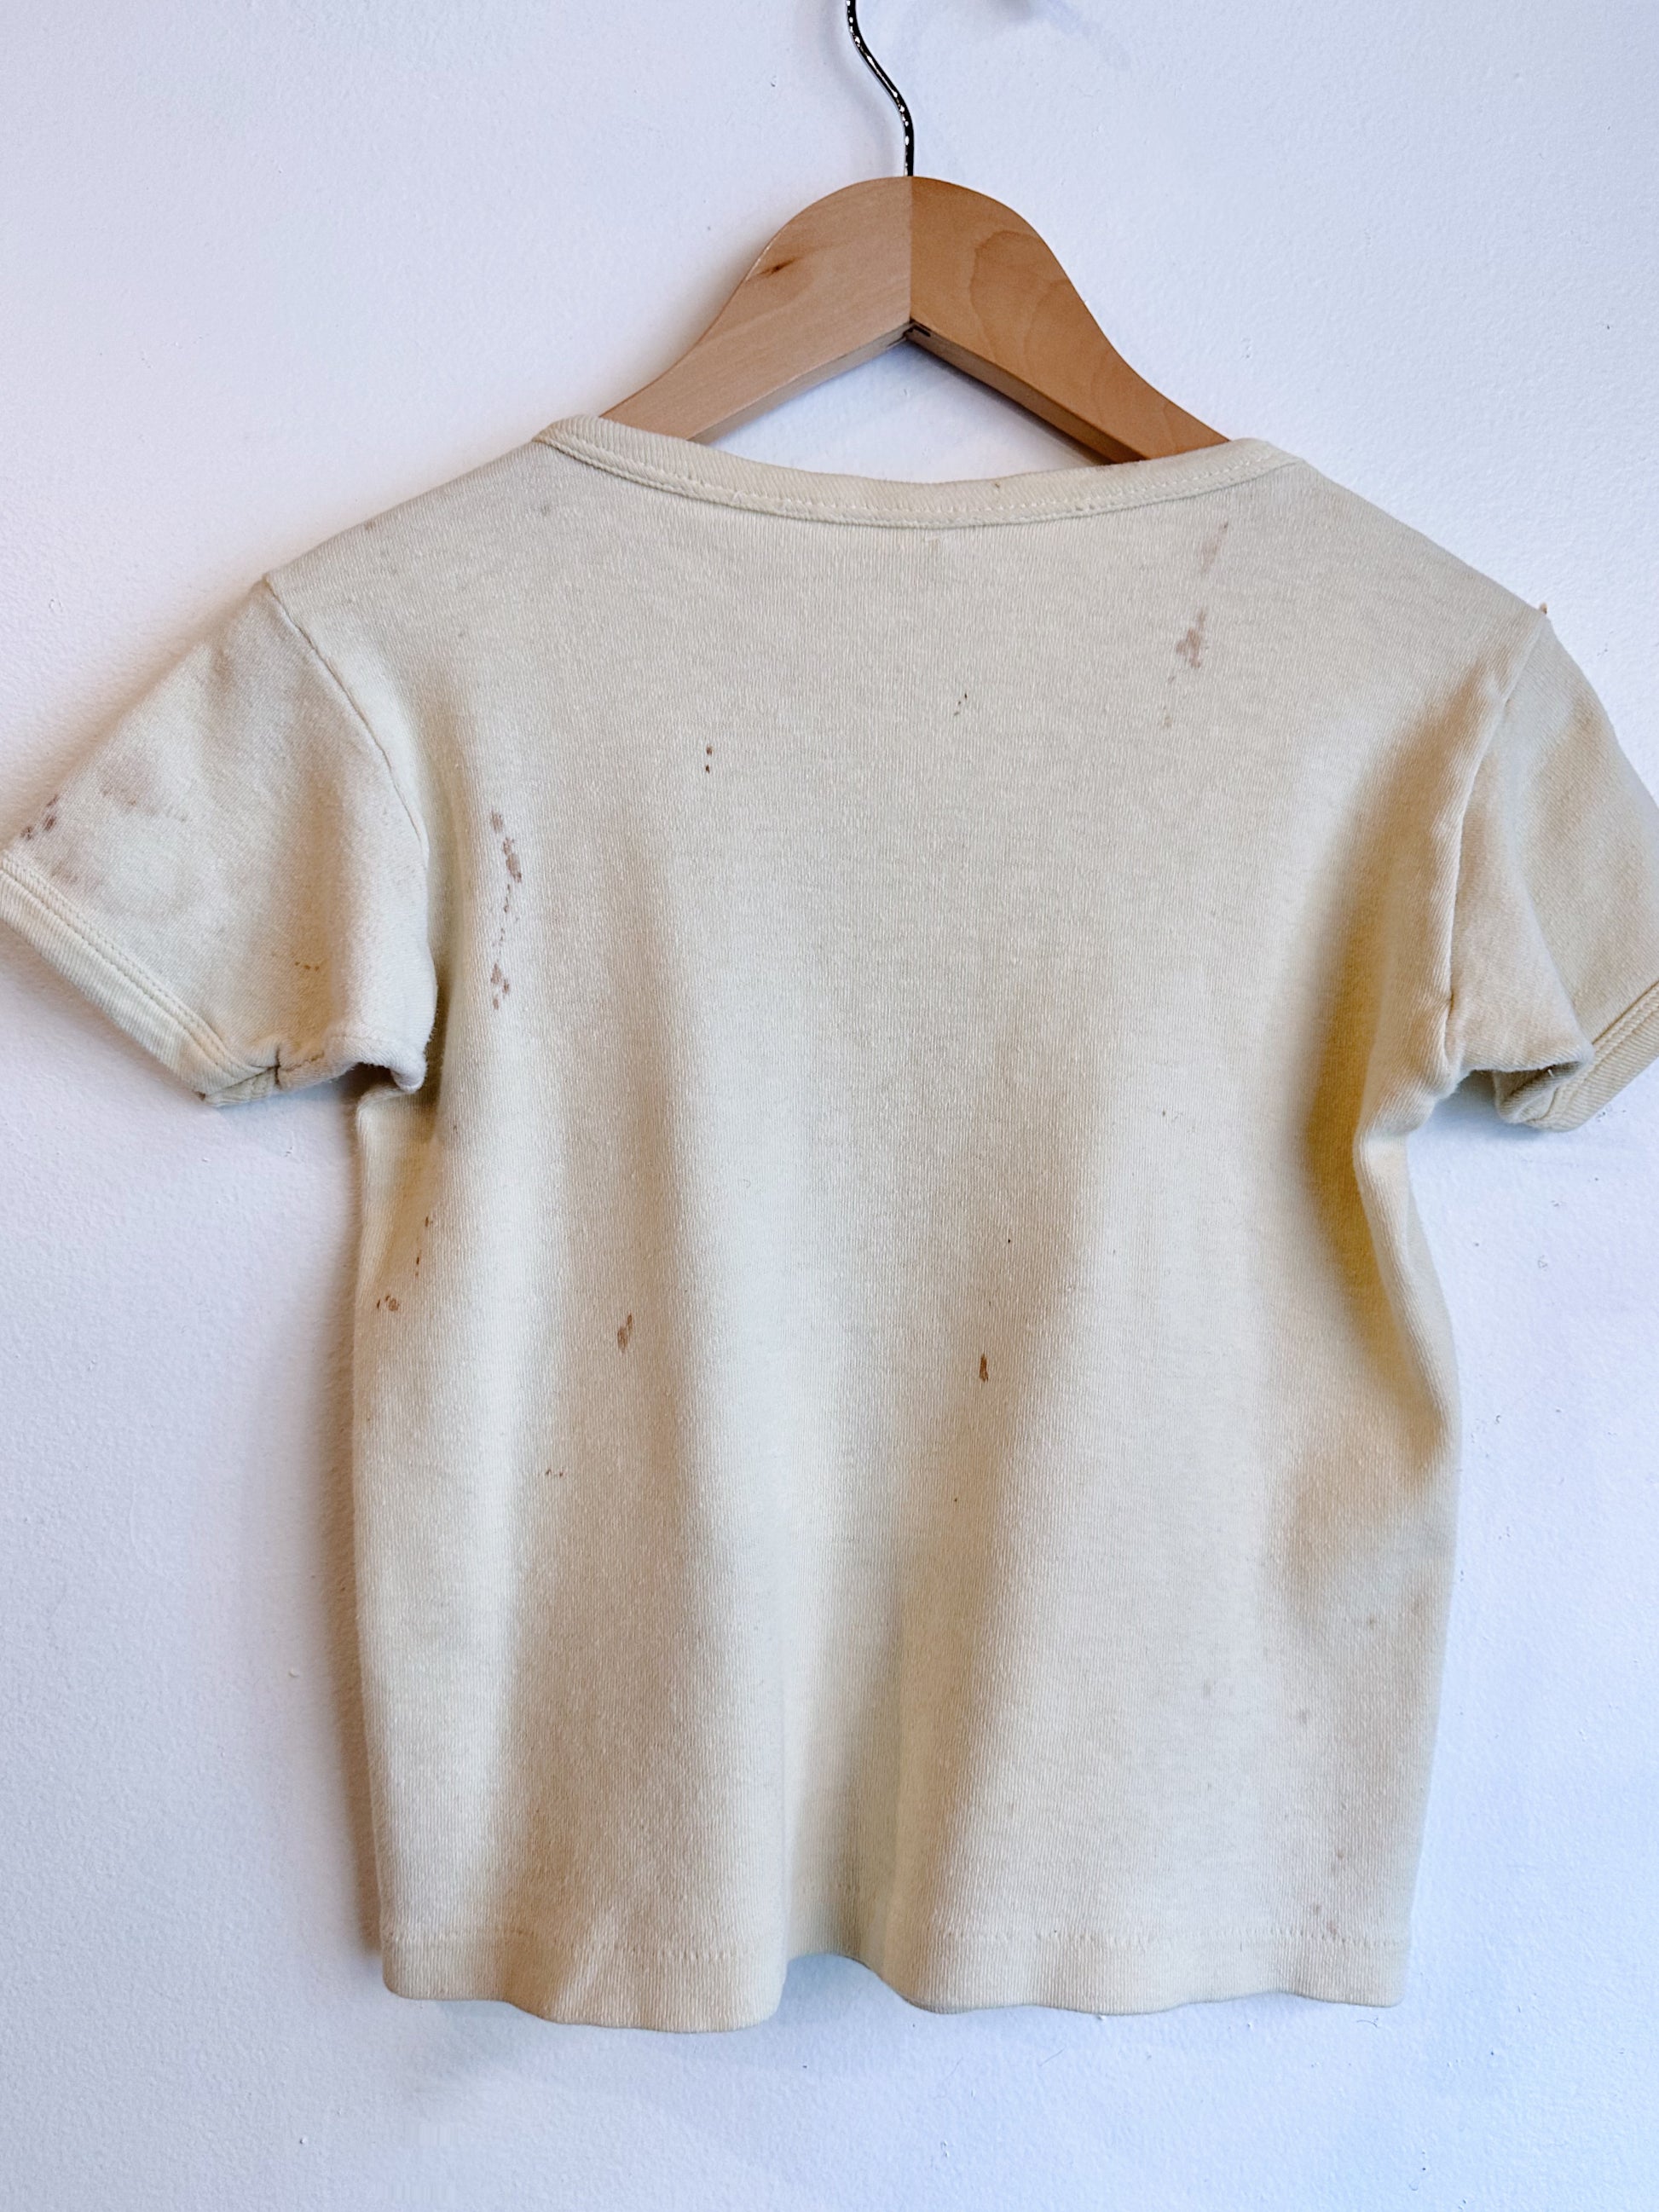 back view of t shirt with stains 